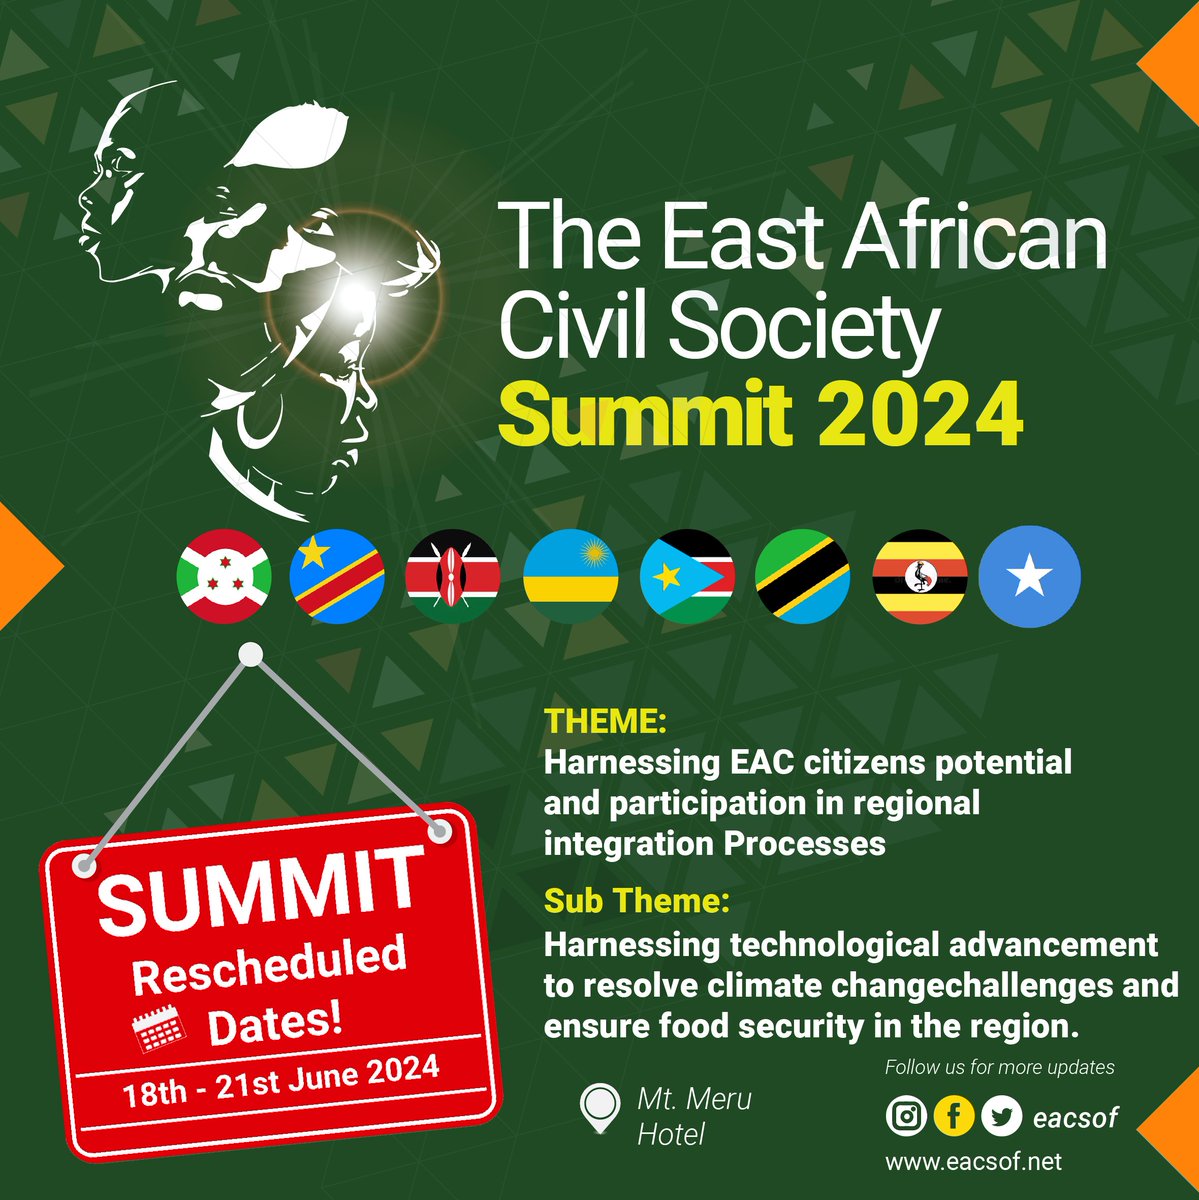 📢 Important Update 📢 The East African Civil Society Summit 2024 has new dates! 🗓️ Originally set for 4th - 7th June, it's now happening from 18th - 21st June. We apologize for any inconvenience caused but believe this change will lead to a more successful event.